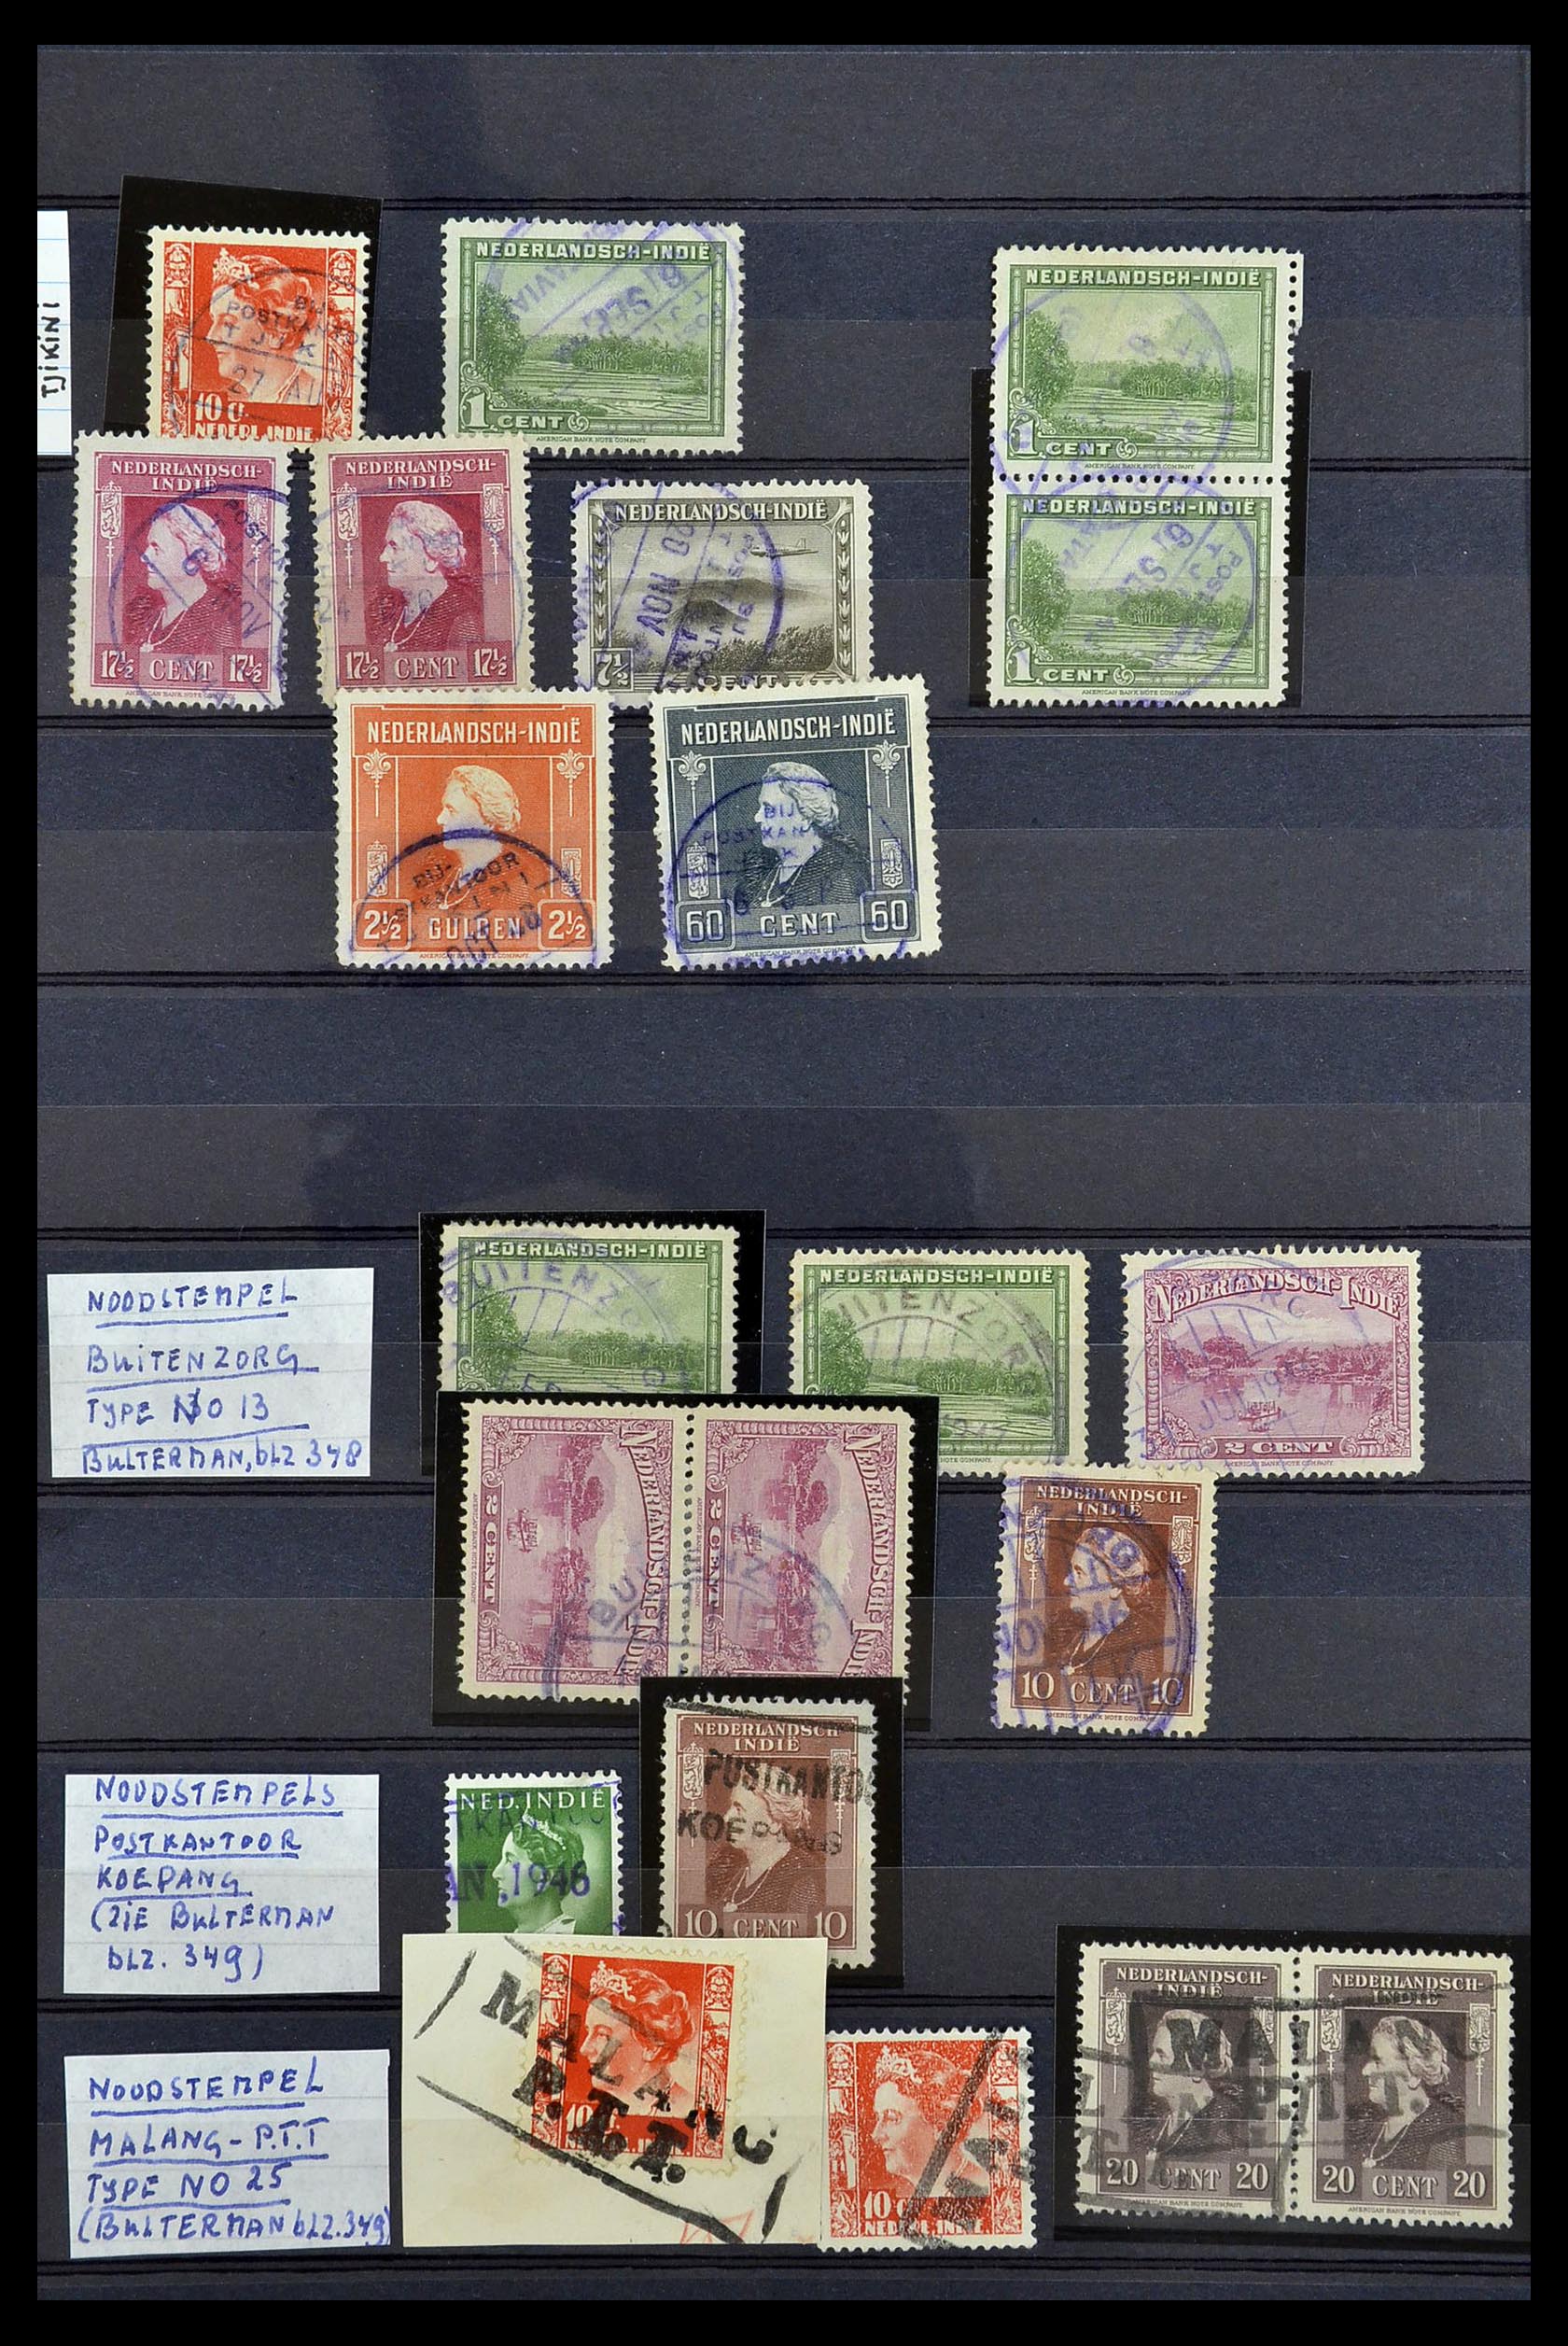 34690 040 - Stamp Collection 34690 Dutch east Indies cancels.